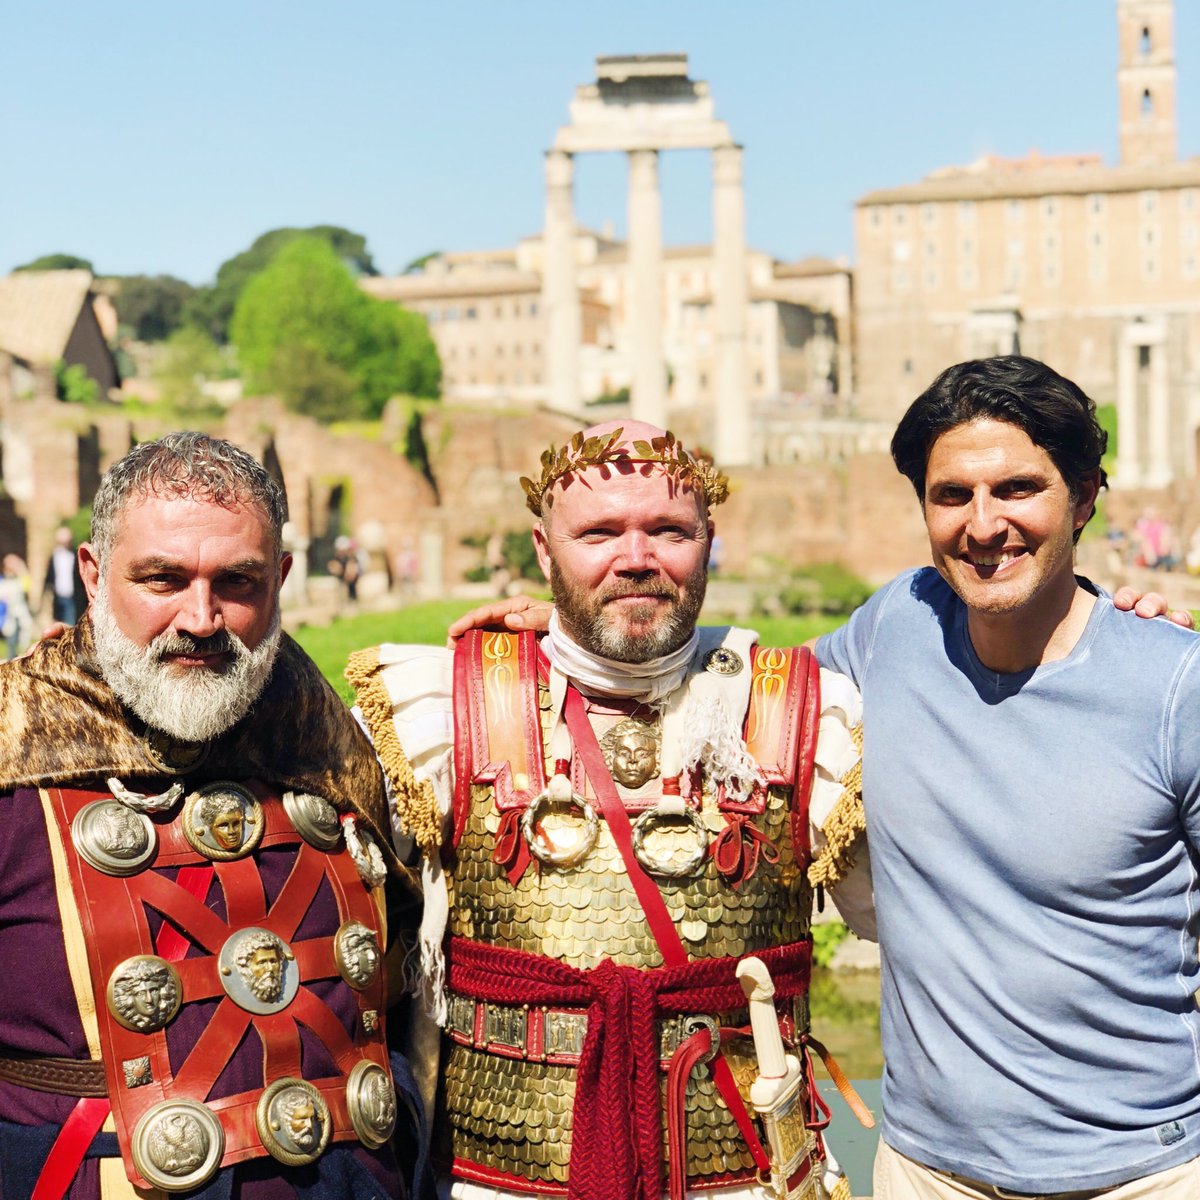 One of my favorite days is April 21 - Rome’s birthday and each year we celebrate with a parade. Since we’re all home, I’ll go digitally - friends, Romans, barbarians feel free to join me!!  #roma753  #natalediroma